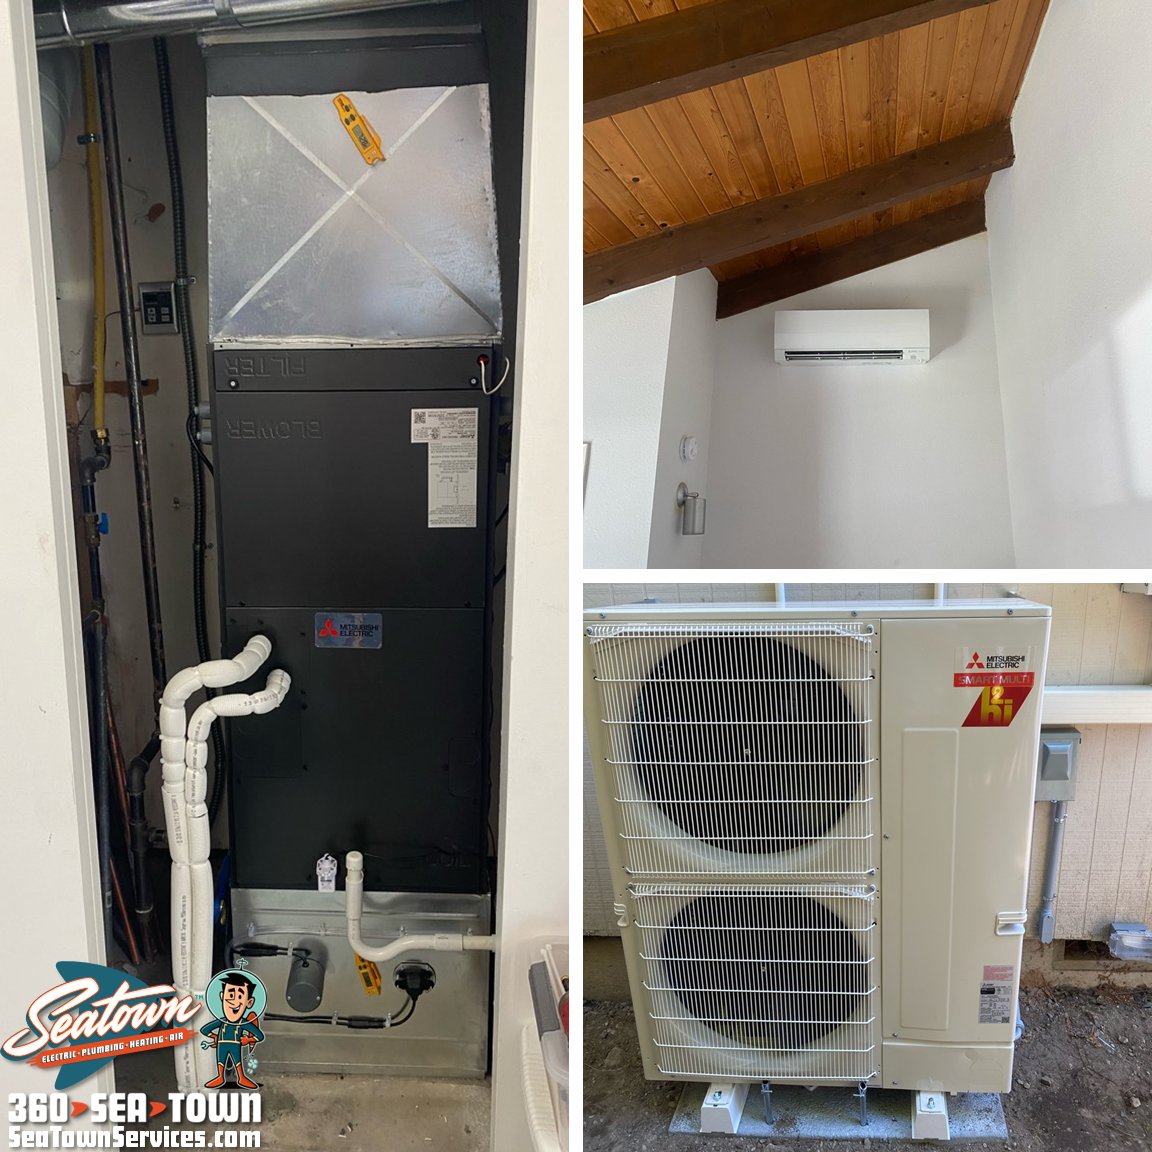 Jay from the Heating and Air team with another beautiful Ductless HVAC system install.  Need some help with your homes Electrical, Plumbing, Heating, and Air projects? Give us a call today! Call us at (360) SEA-TOWN(360-732-8696)